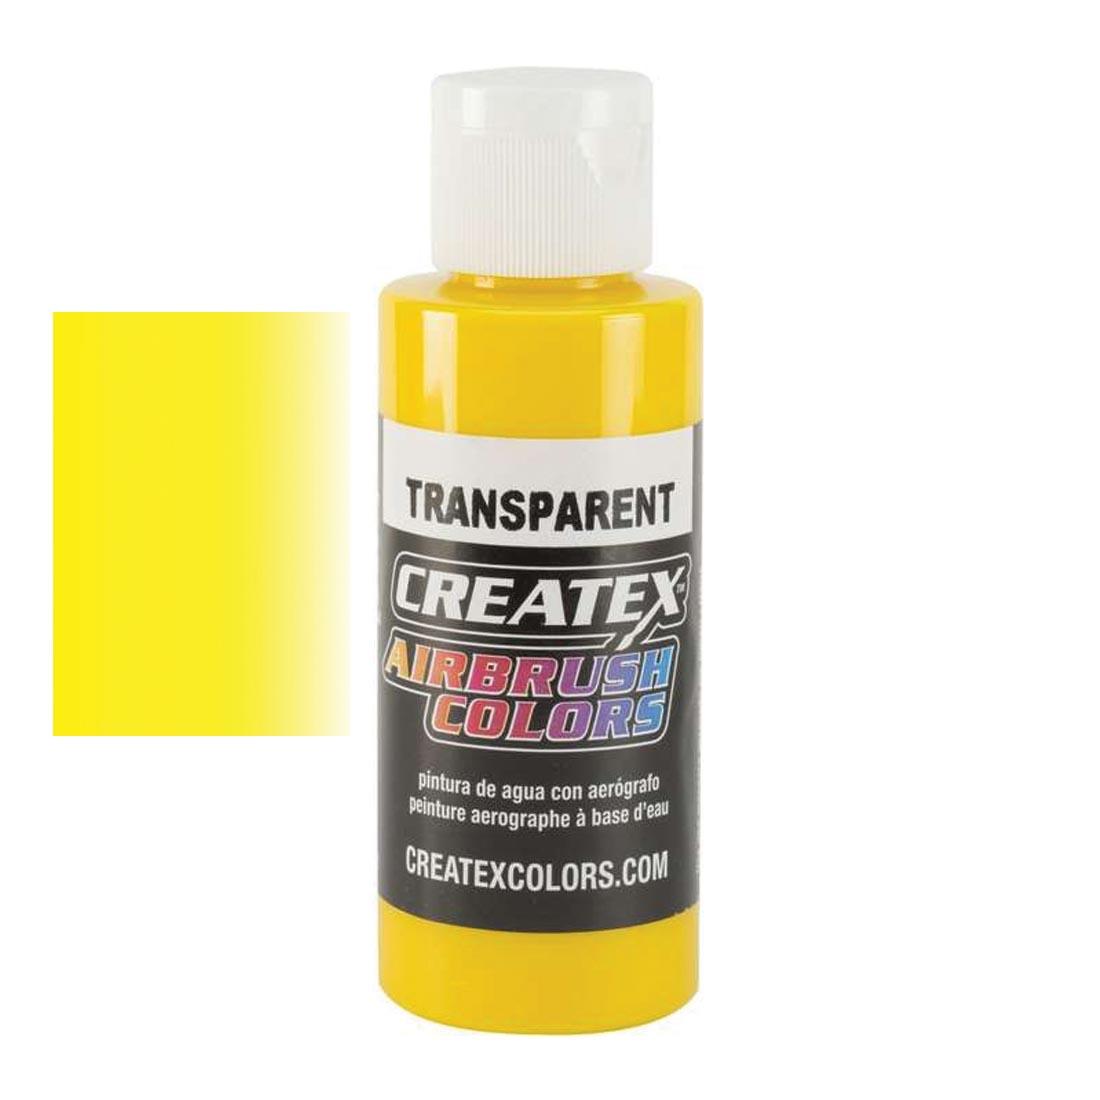 Bottle of Createx Airbrush Color Beside Transparent Brite Yellow Color Swatch